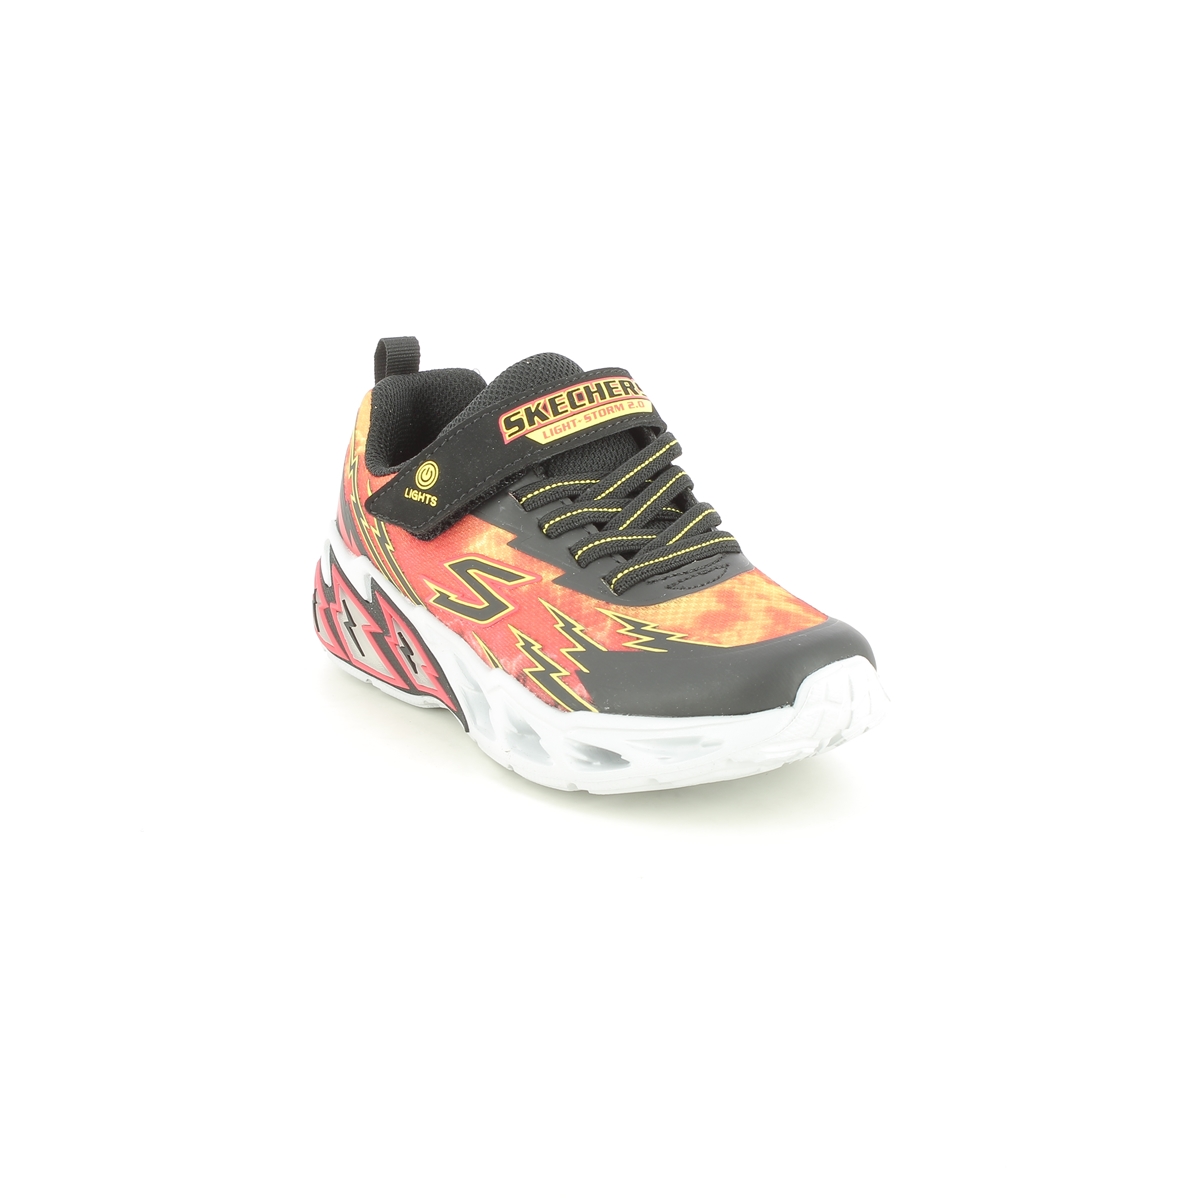 Skechers Light Storm 2.0 Black Red Kids Trainers 400150L In Size 29 In Plain Black Red For kids